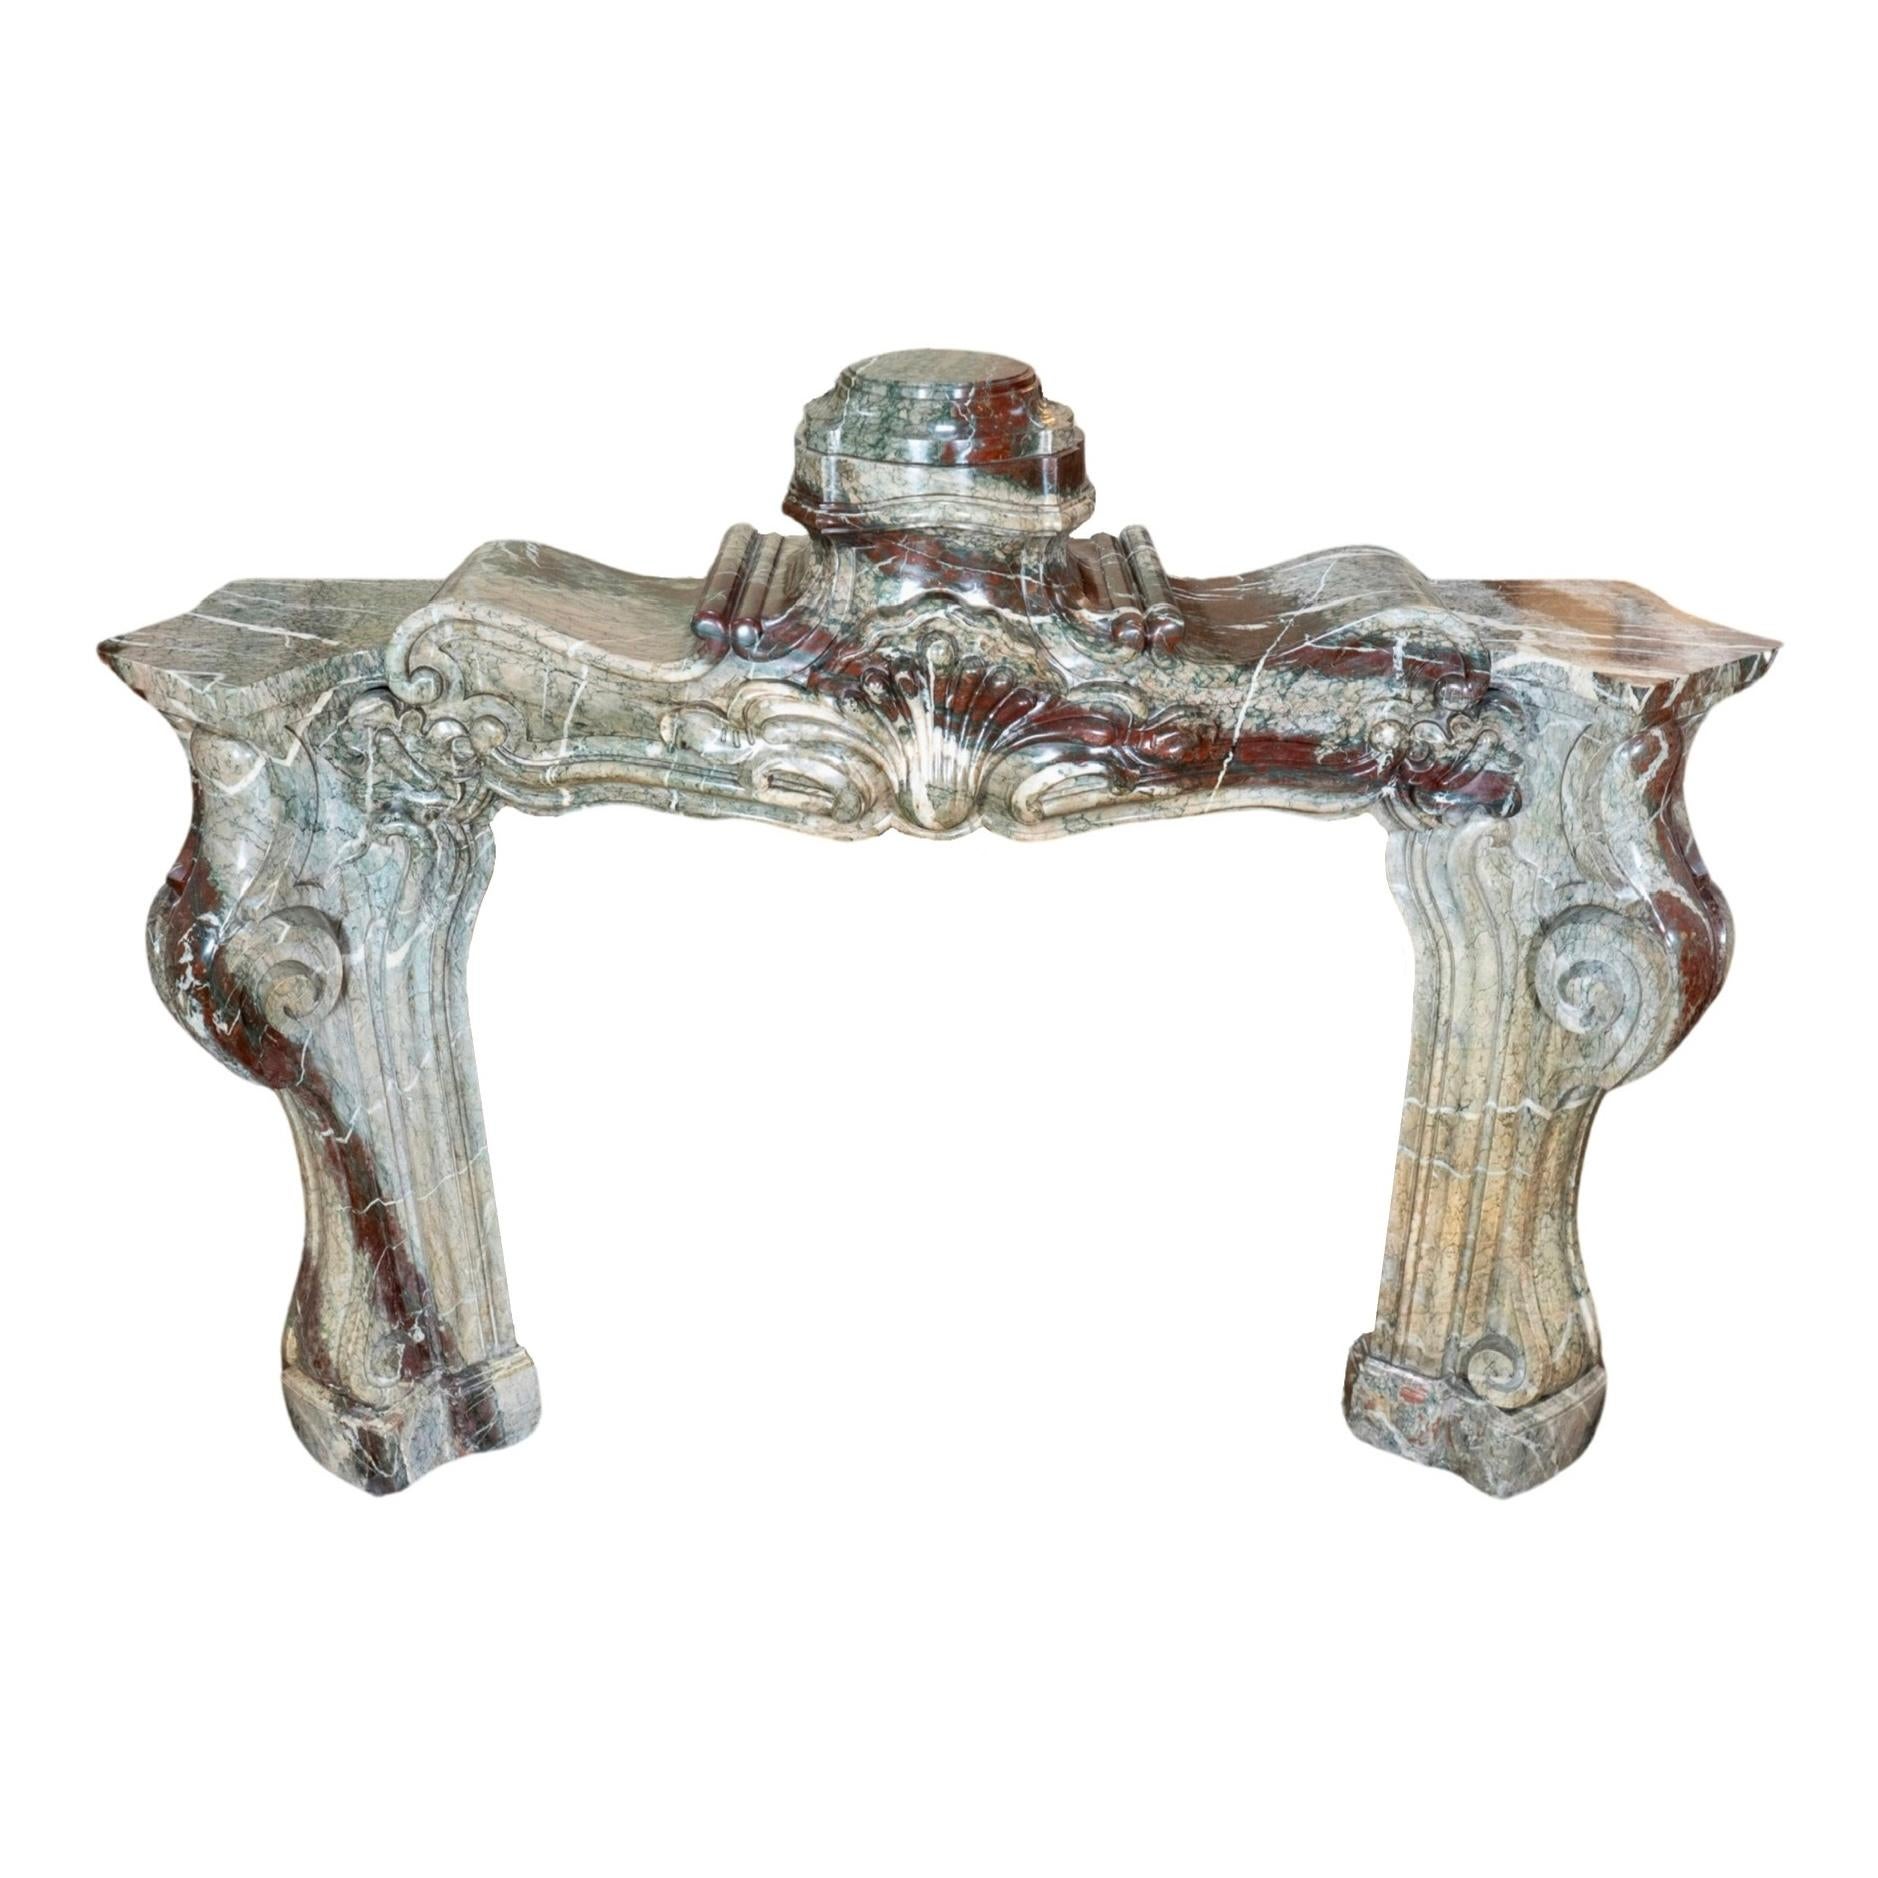 Baroque marble fireplace. Originates from France, circa 1800. This unique mantelpiece is the perfect way to add style and elegance to your home, with its intricate design featuring ornate detailing and luxurious Baroque marble.

 

Measurements: